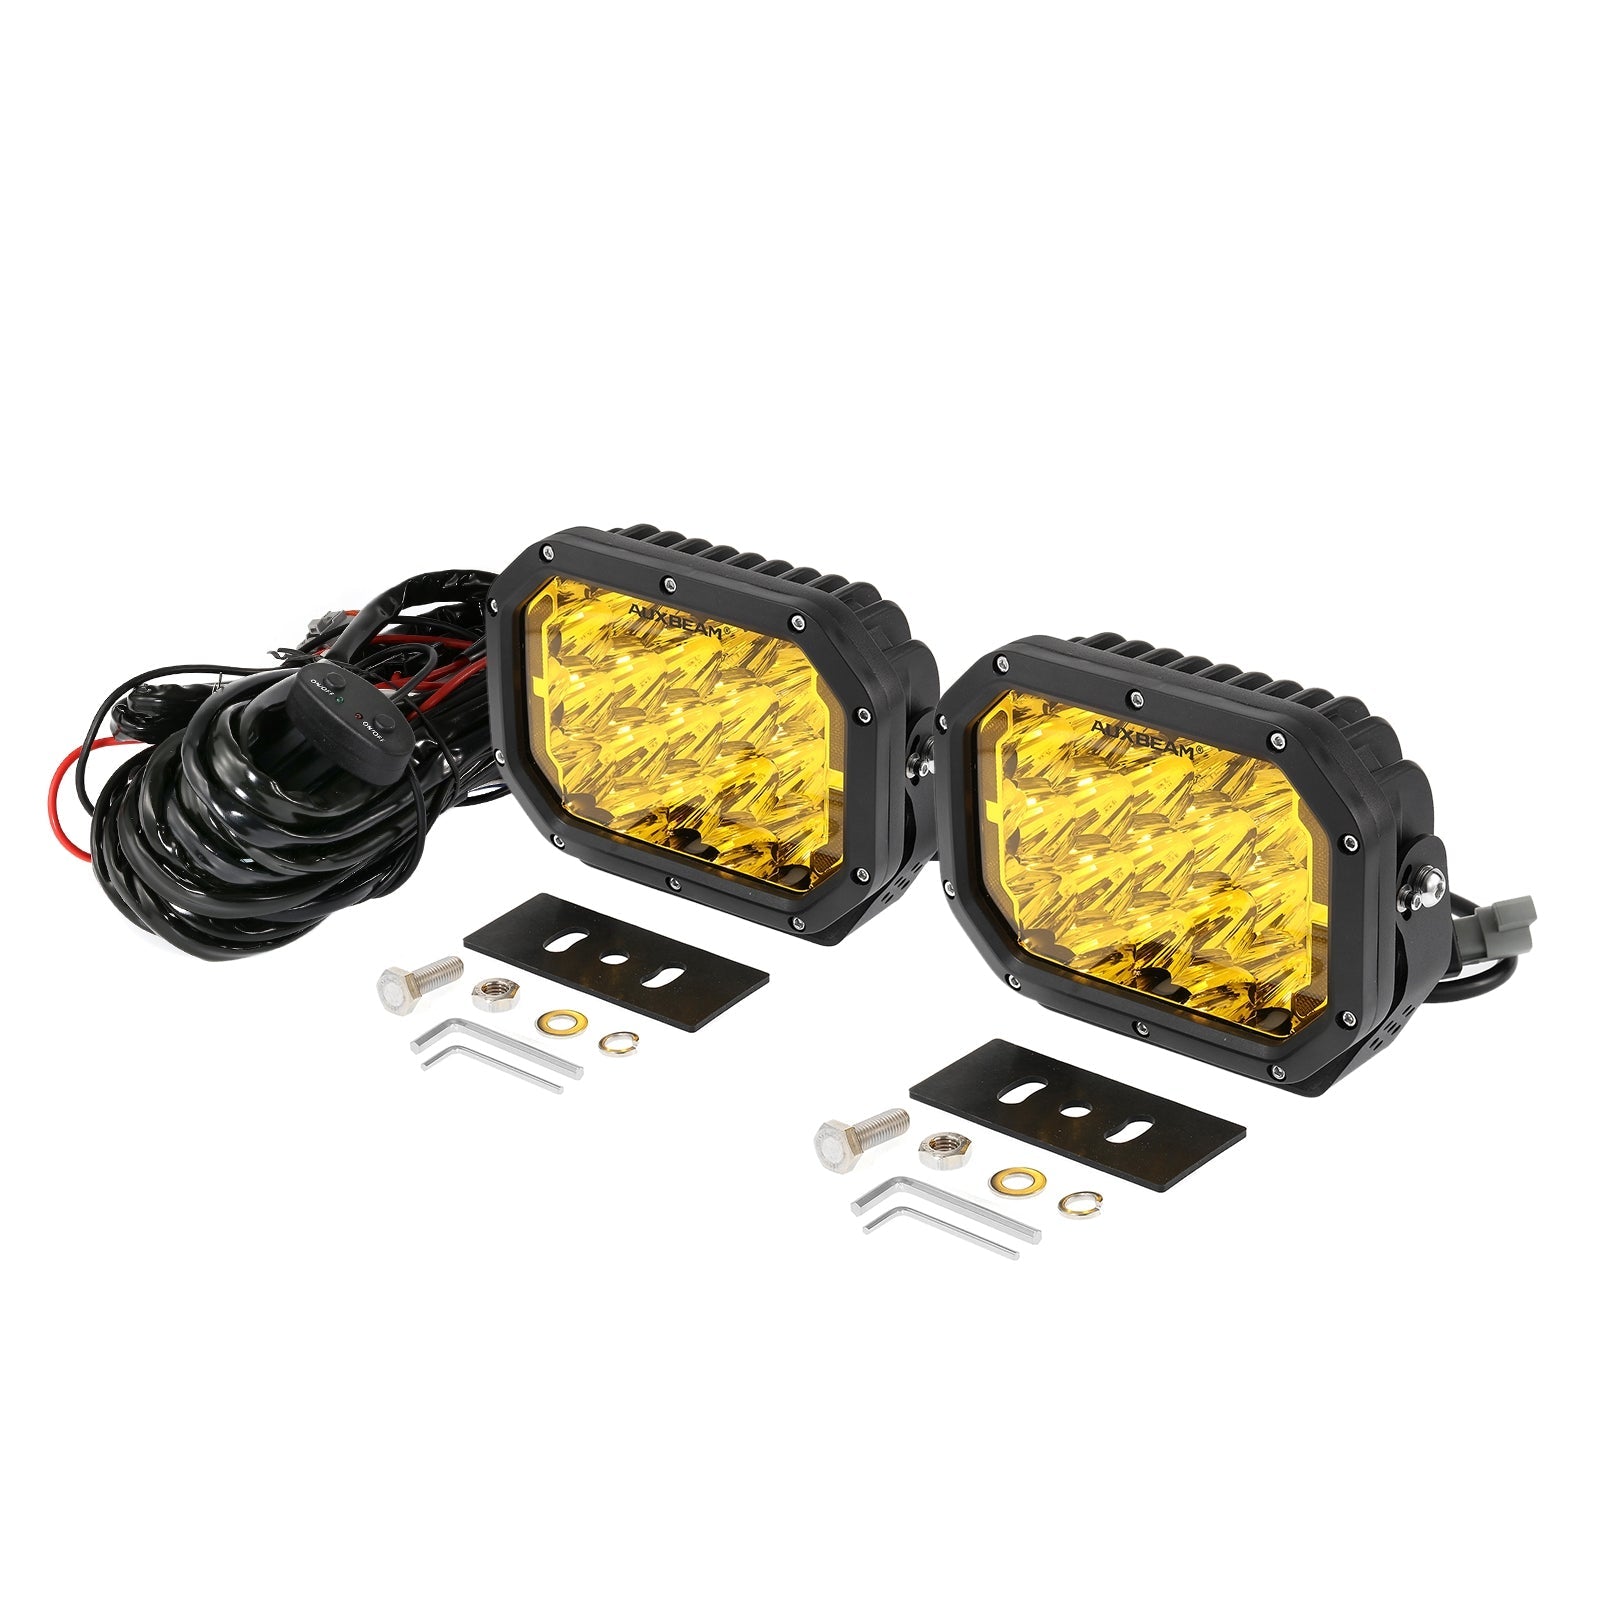 7x5 Inch Rectangle LED Pods Amber Spot Driving Lights with DRL